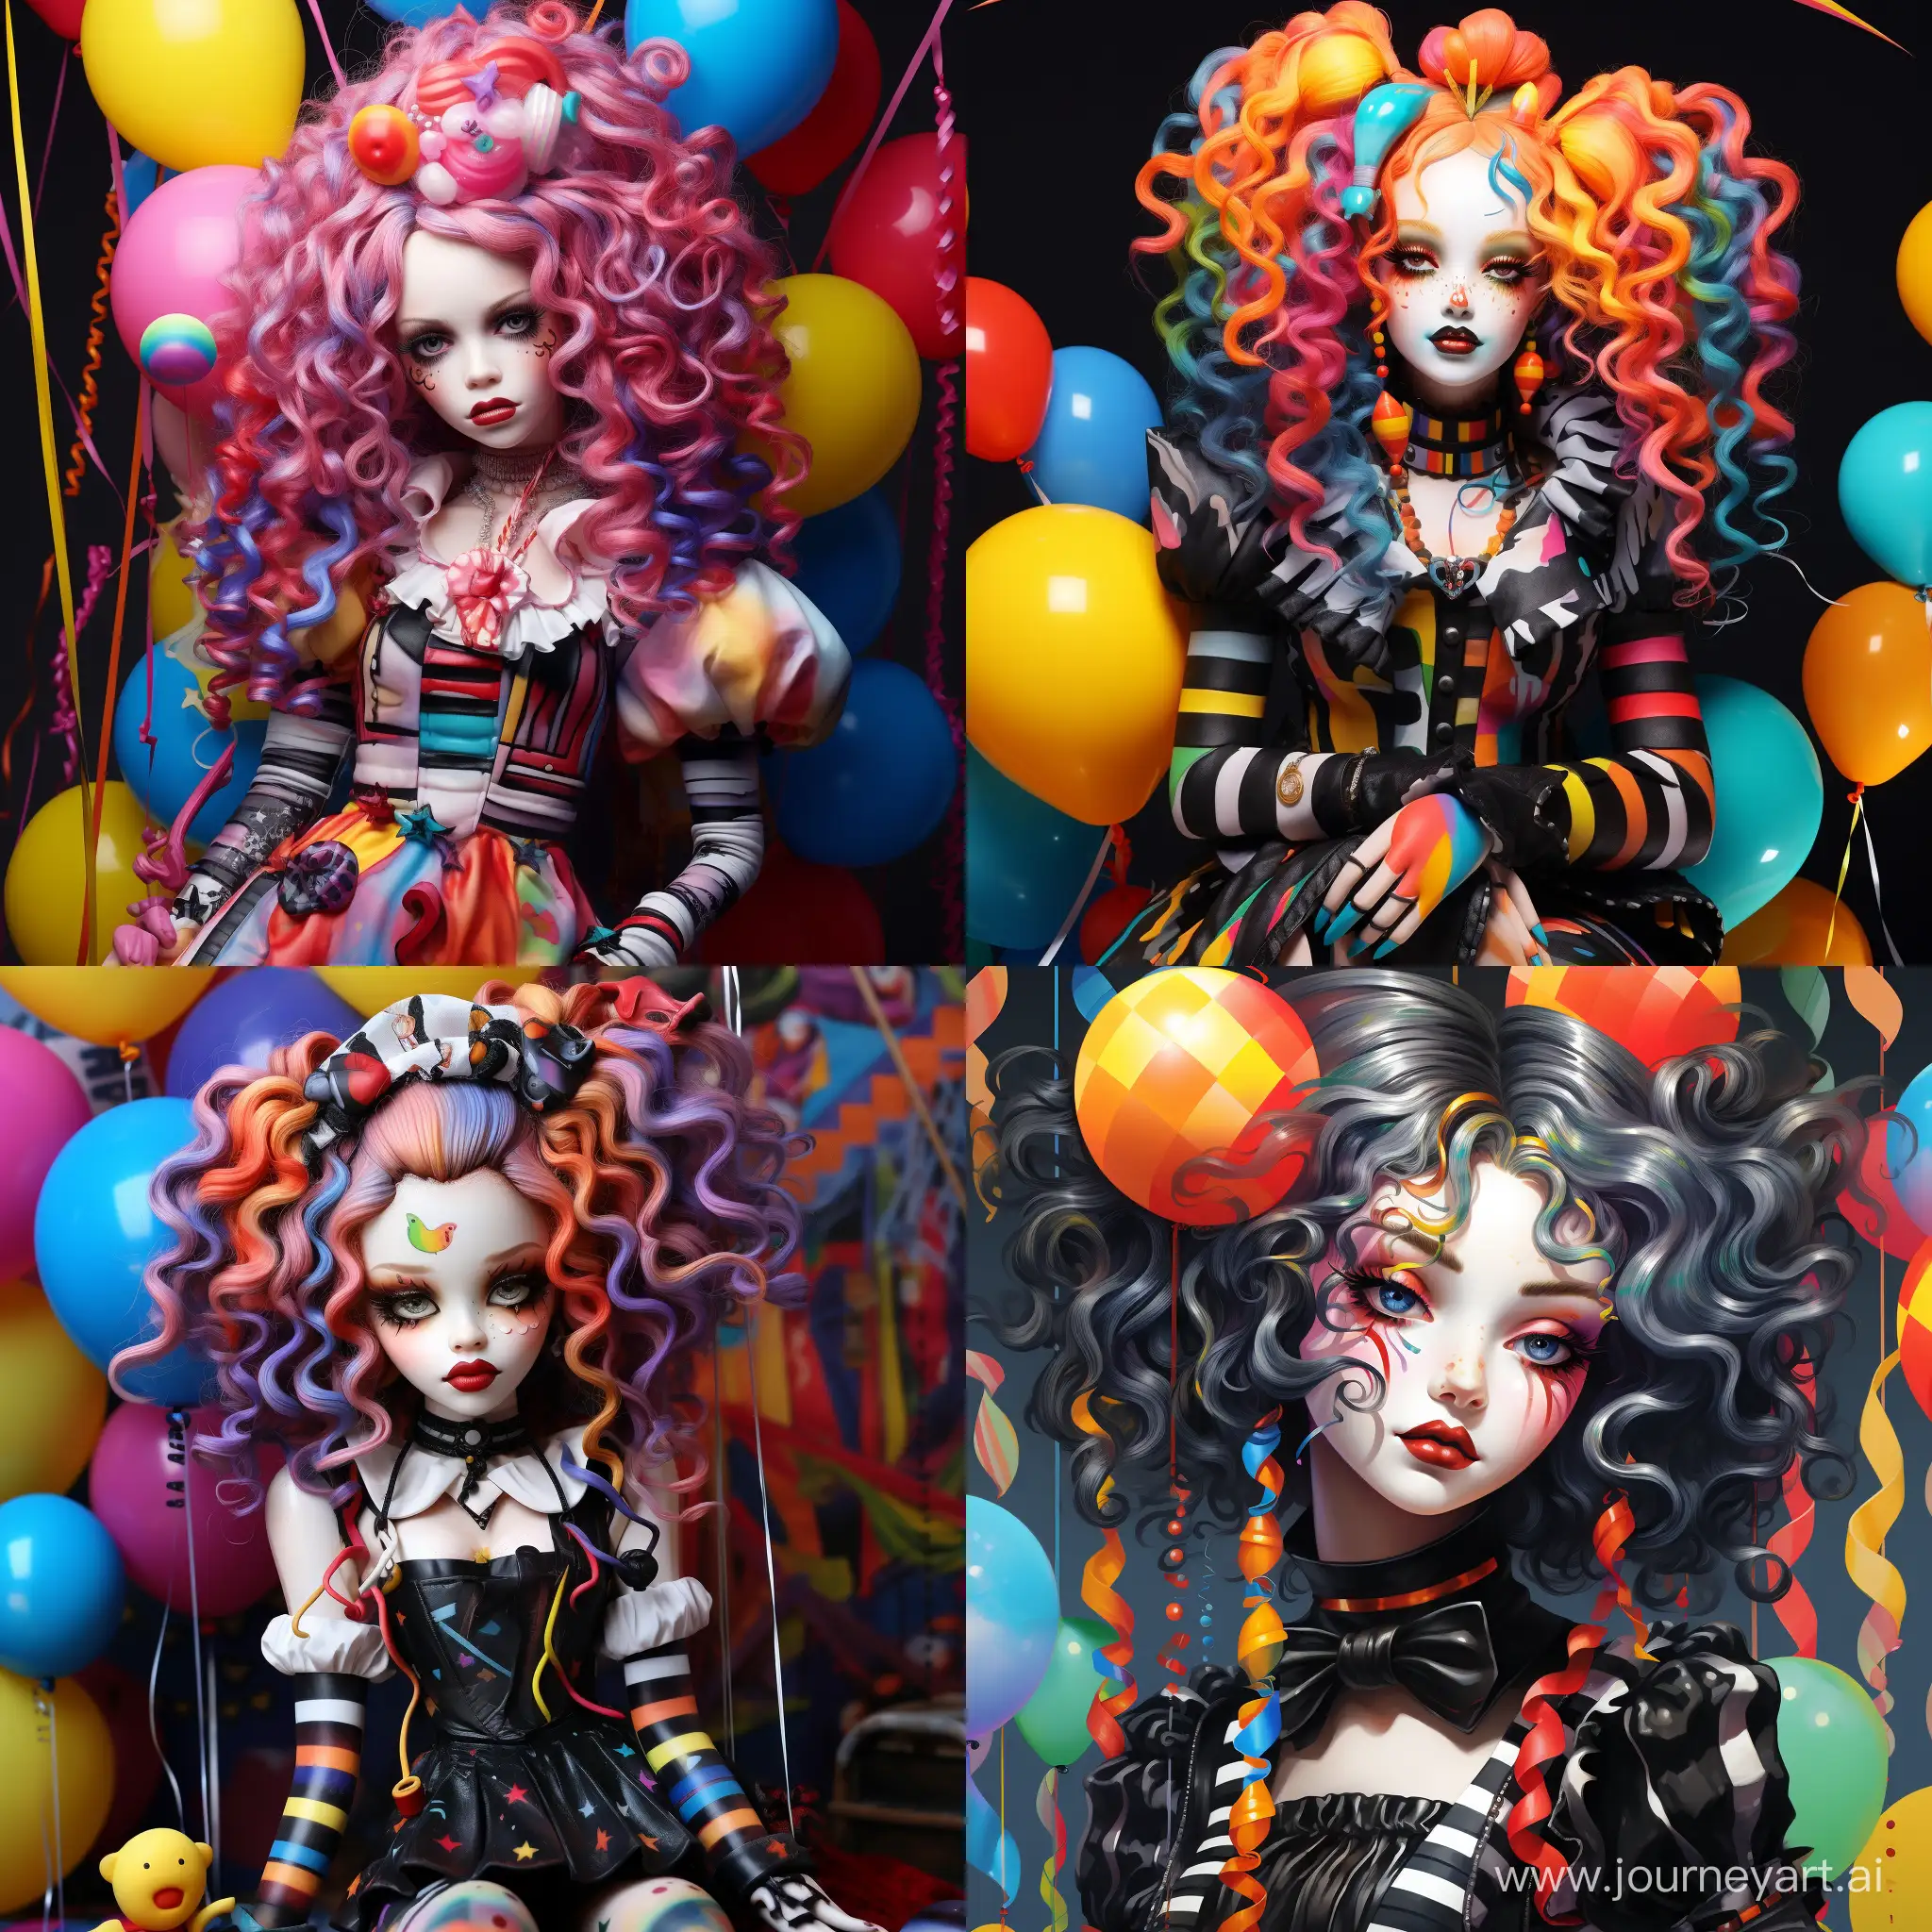 Gothic-Fashion-BJD-Doll-with-Big-Curly-Pigtails-in-Graffiti-Neon-Circus-Scene